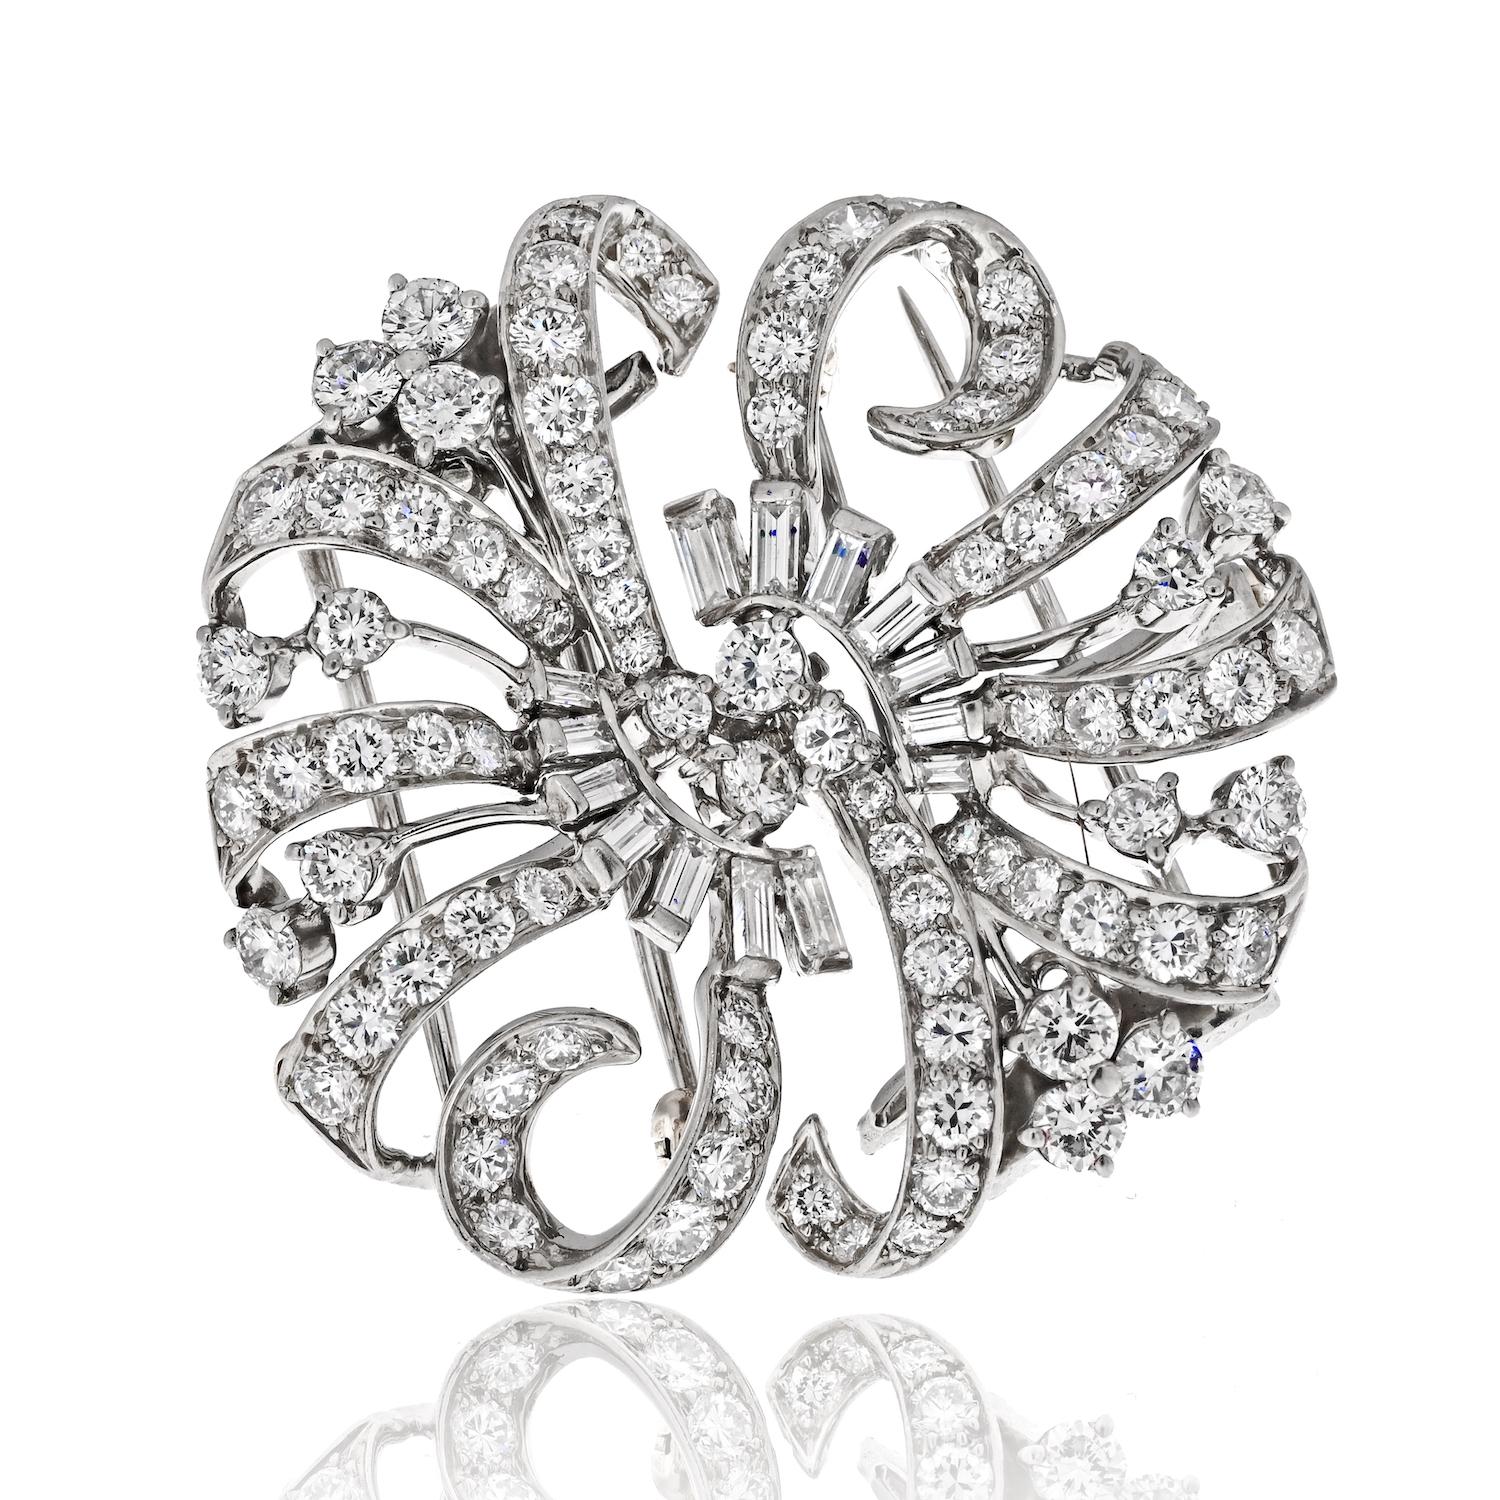 Prepare to be enchanted by the sheer elegance and versatility of this Tiffany & Co. diamond brooch. Crafted in exquisite platinum, this remarkable piece showcases a stunning display of round and baguette diamonds, totaling an impressive